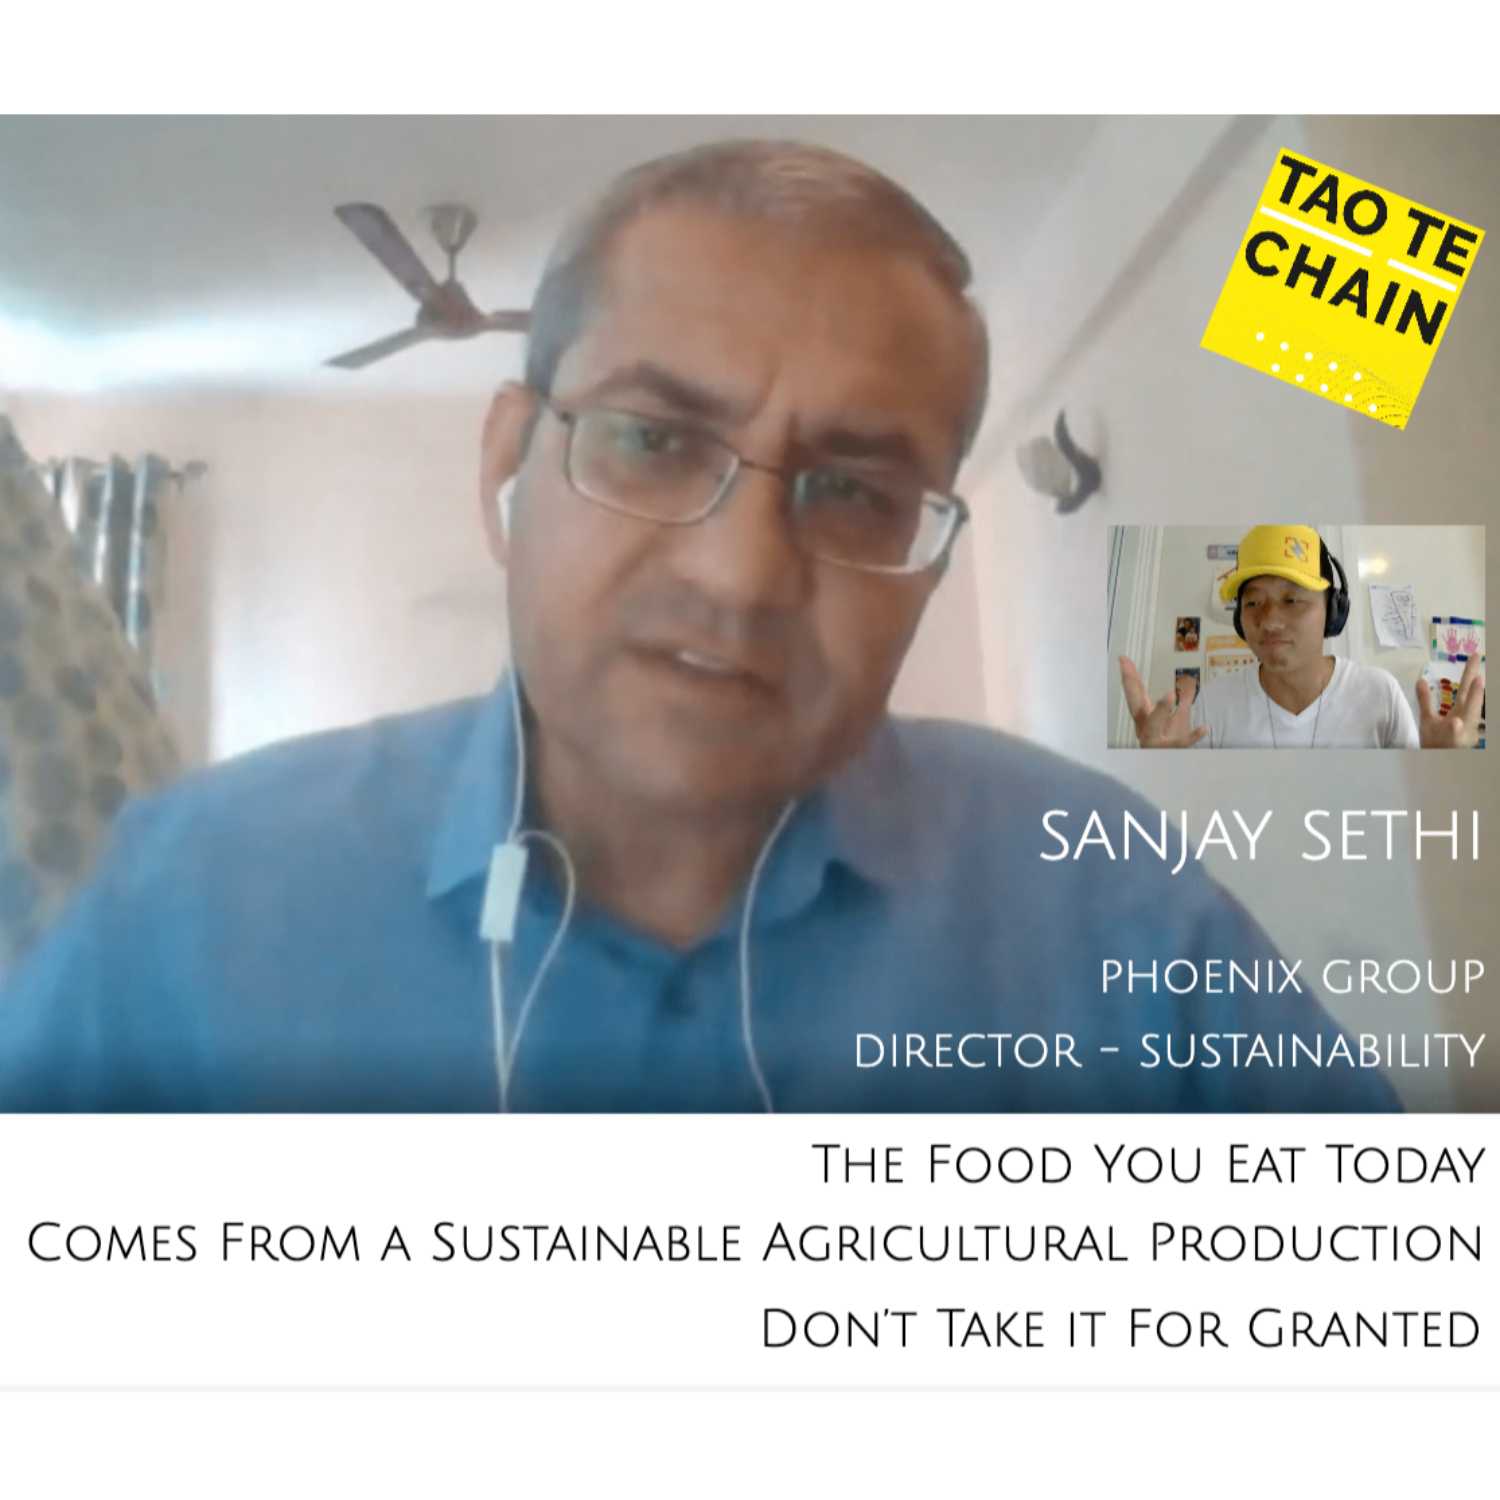 Sanjay Sethi - The Food You Eat Today Comes From a Sustainable Agricultural Production. Don’t Take it For Granted.